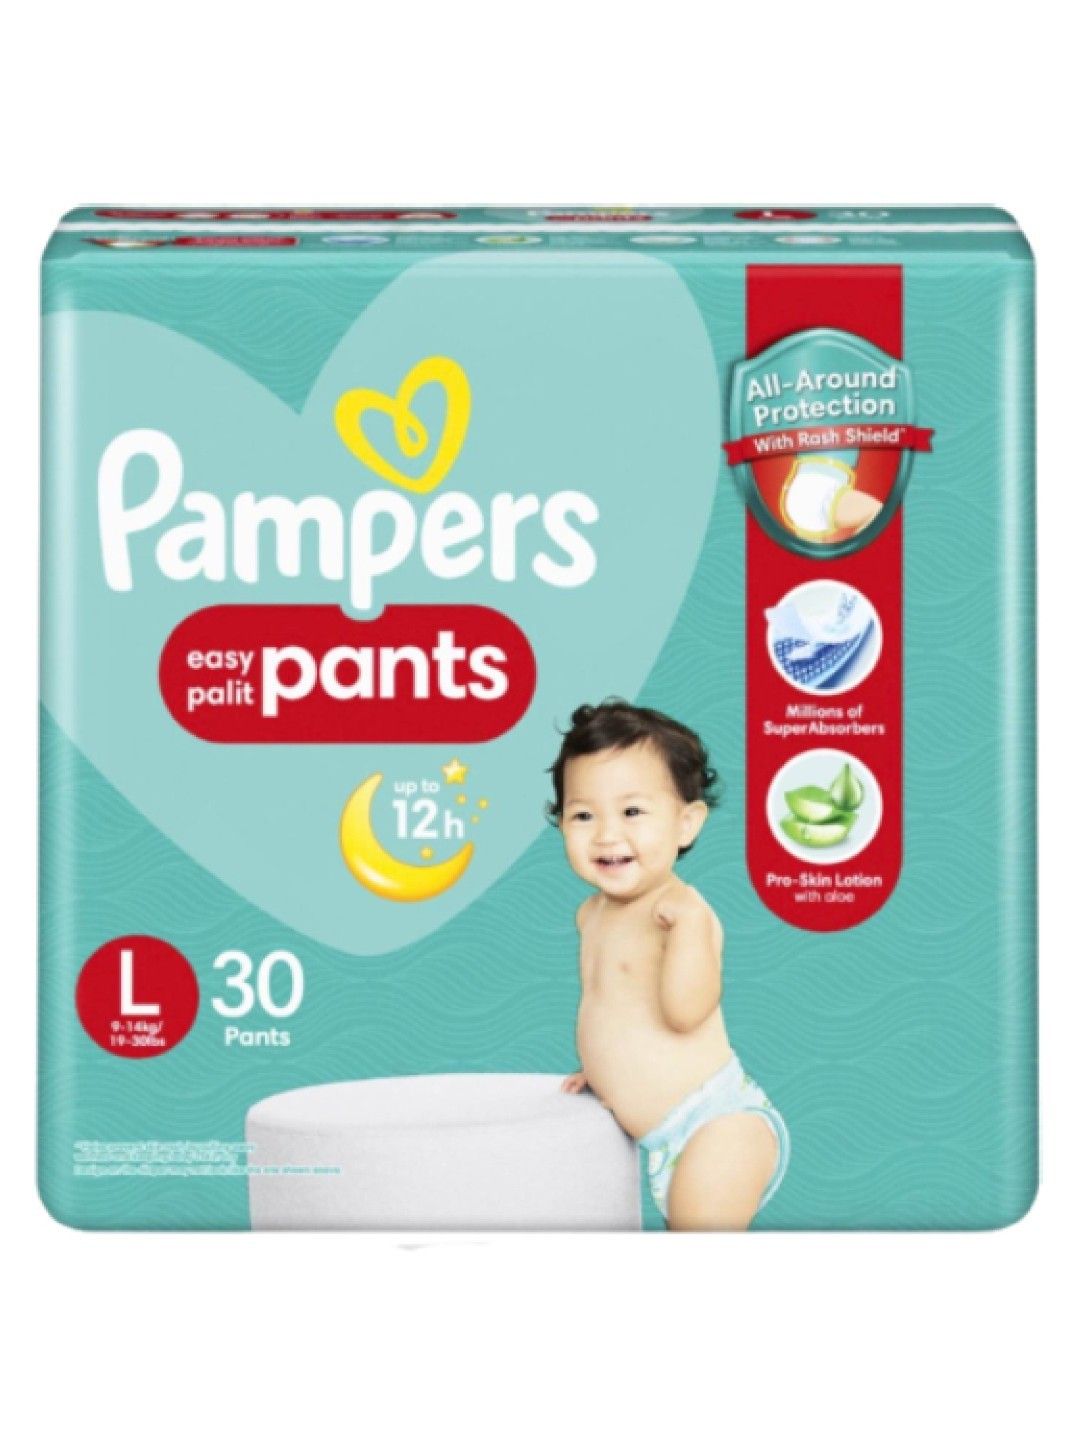 Pampers Baby Dry Pants Large 30s x 1 pack (30 pcs)